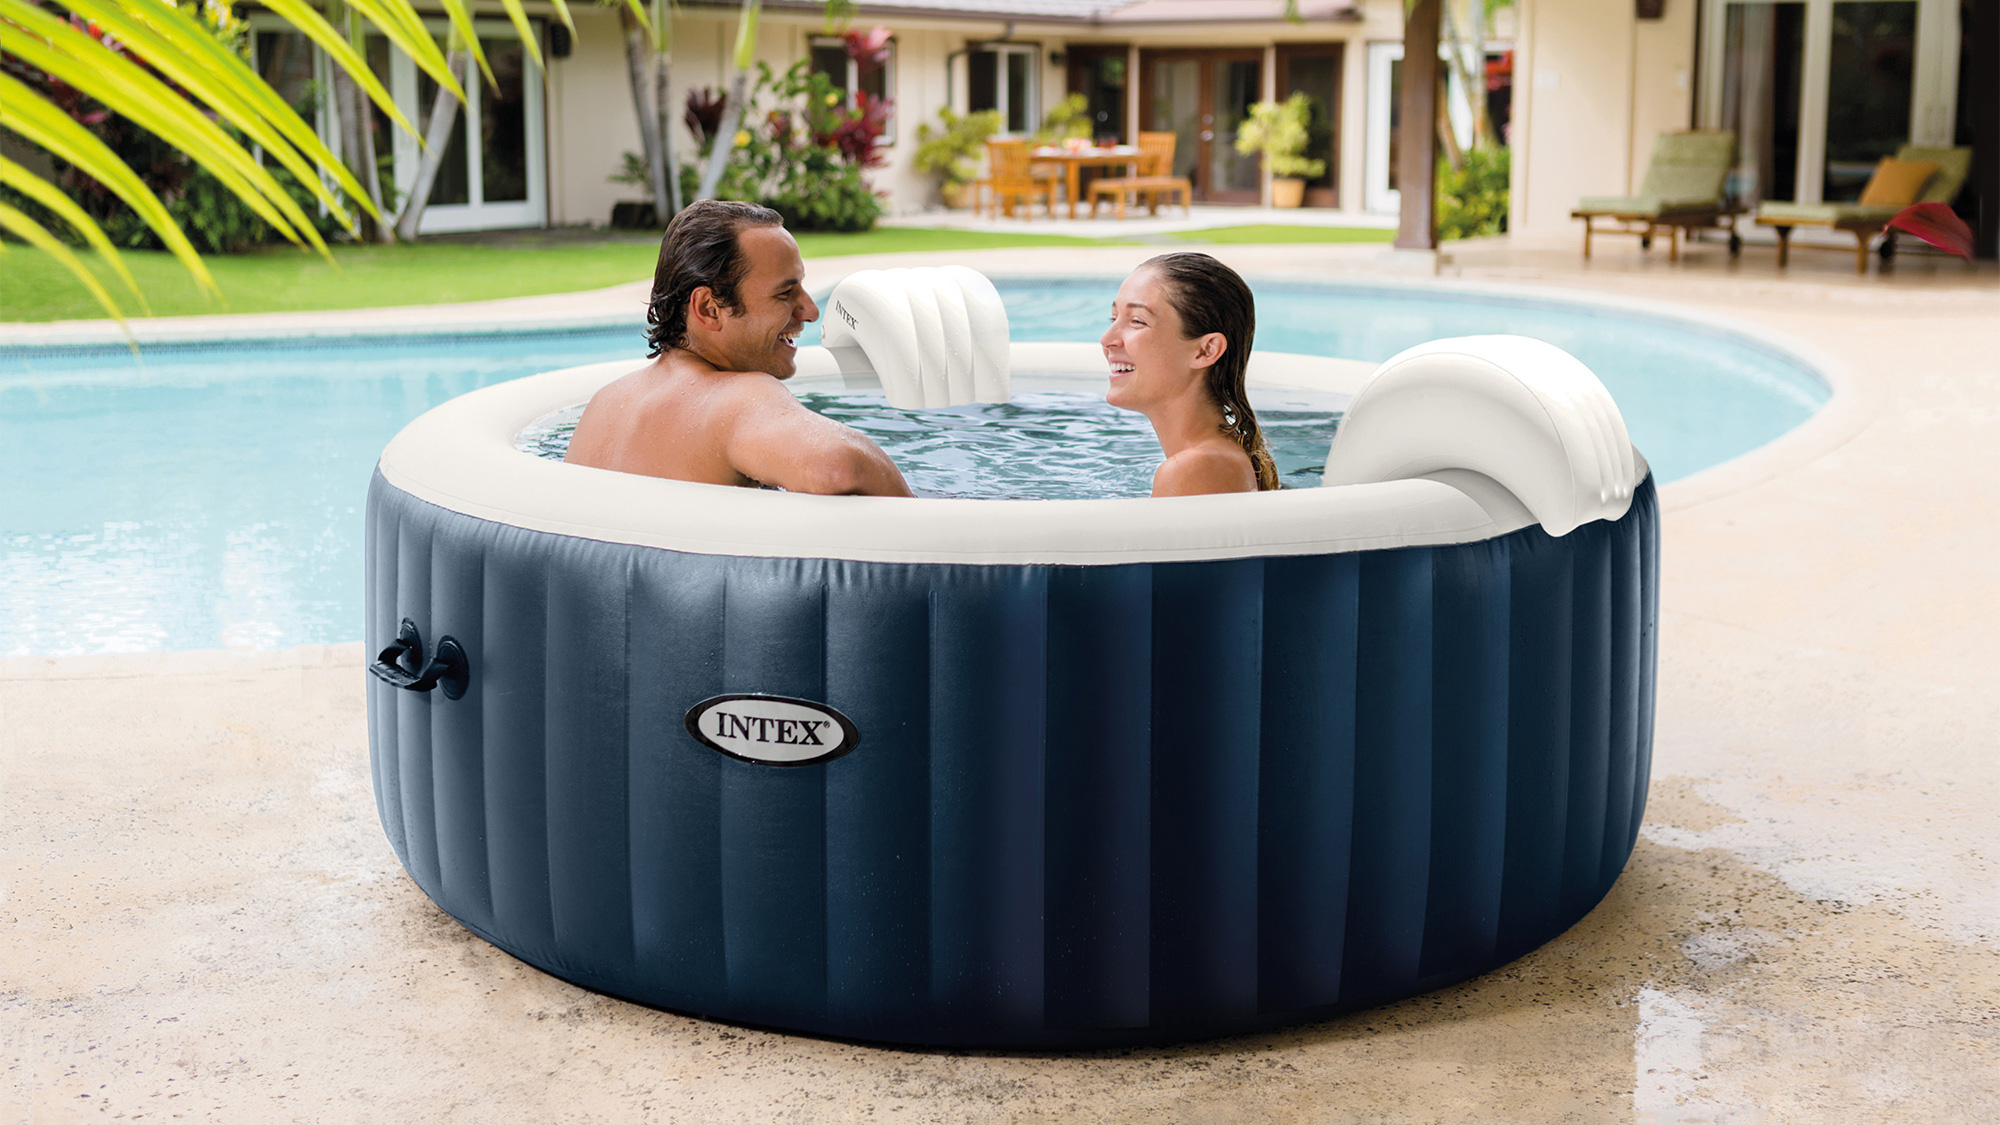 What Can I Put Under My Inflatable Hot Tub